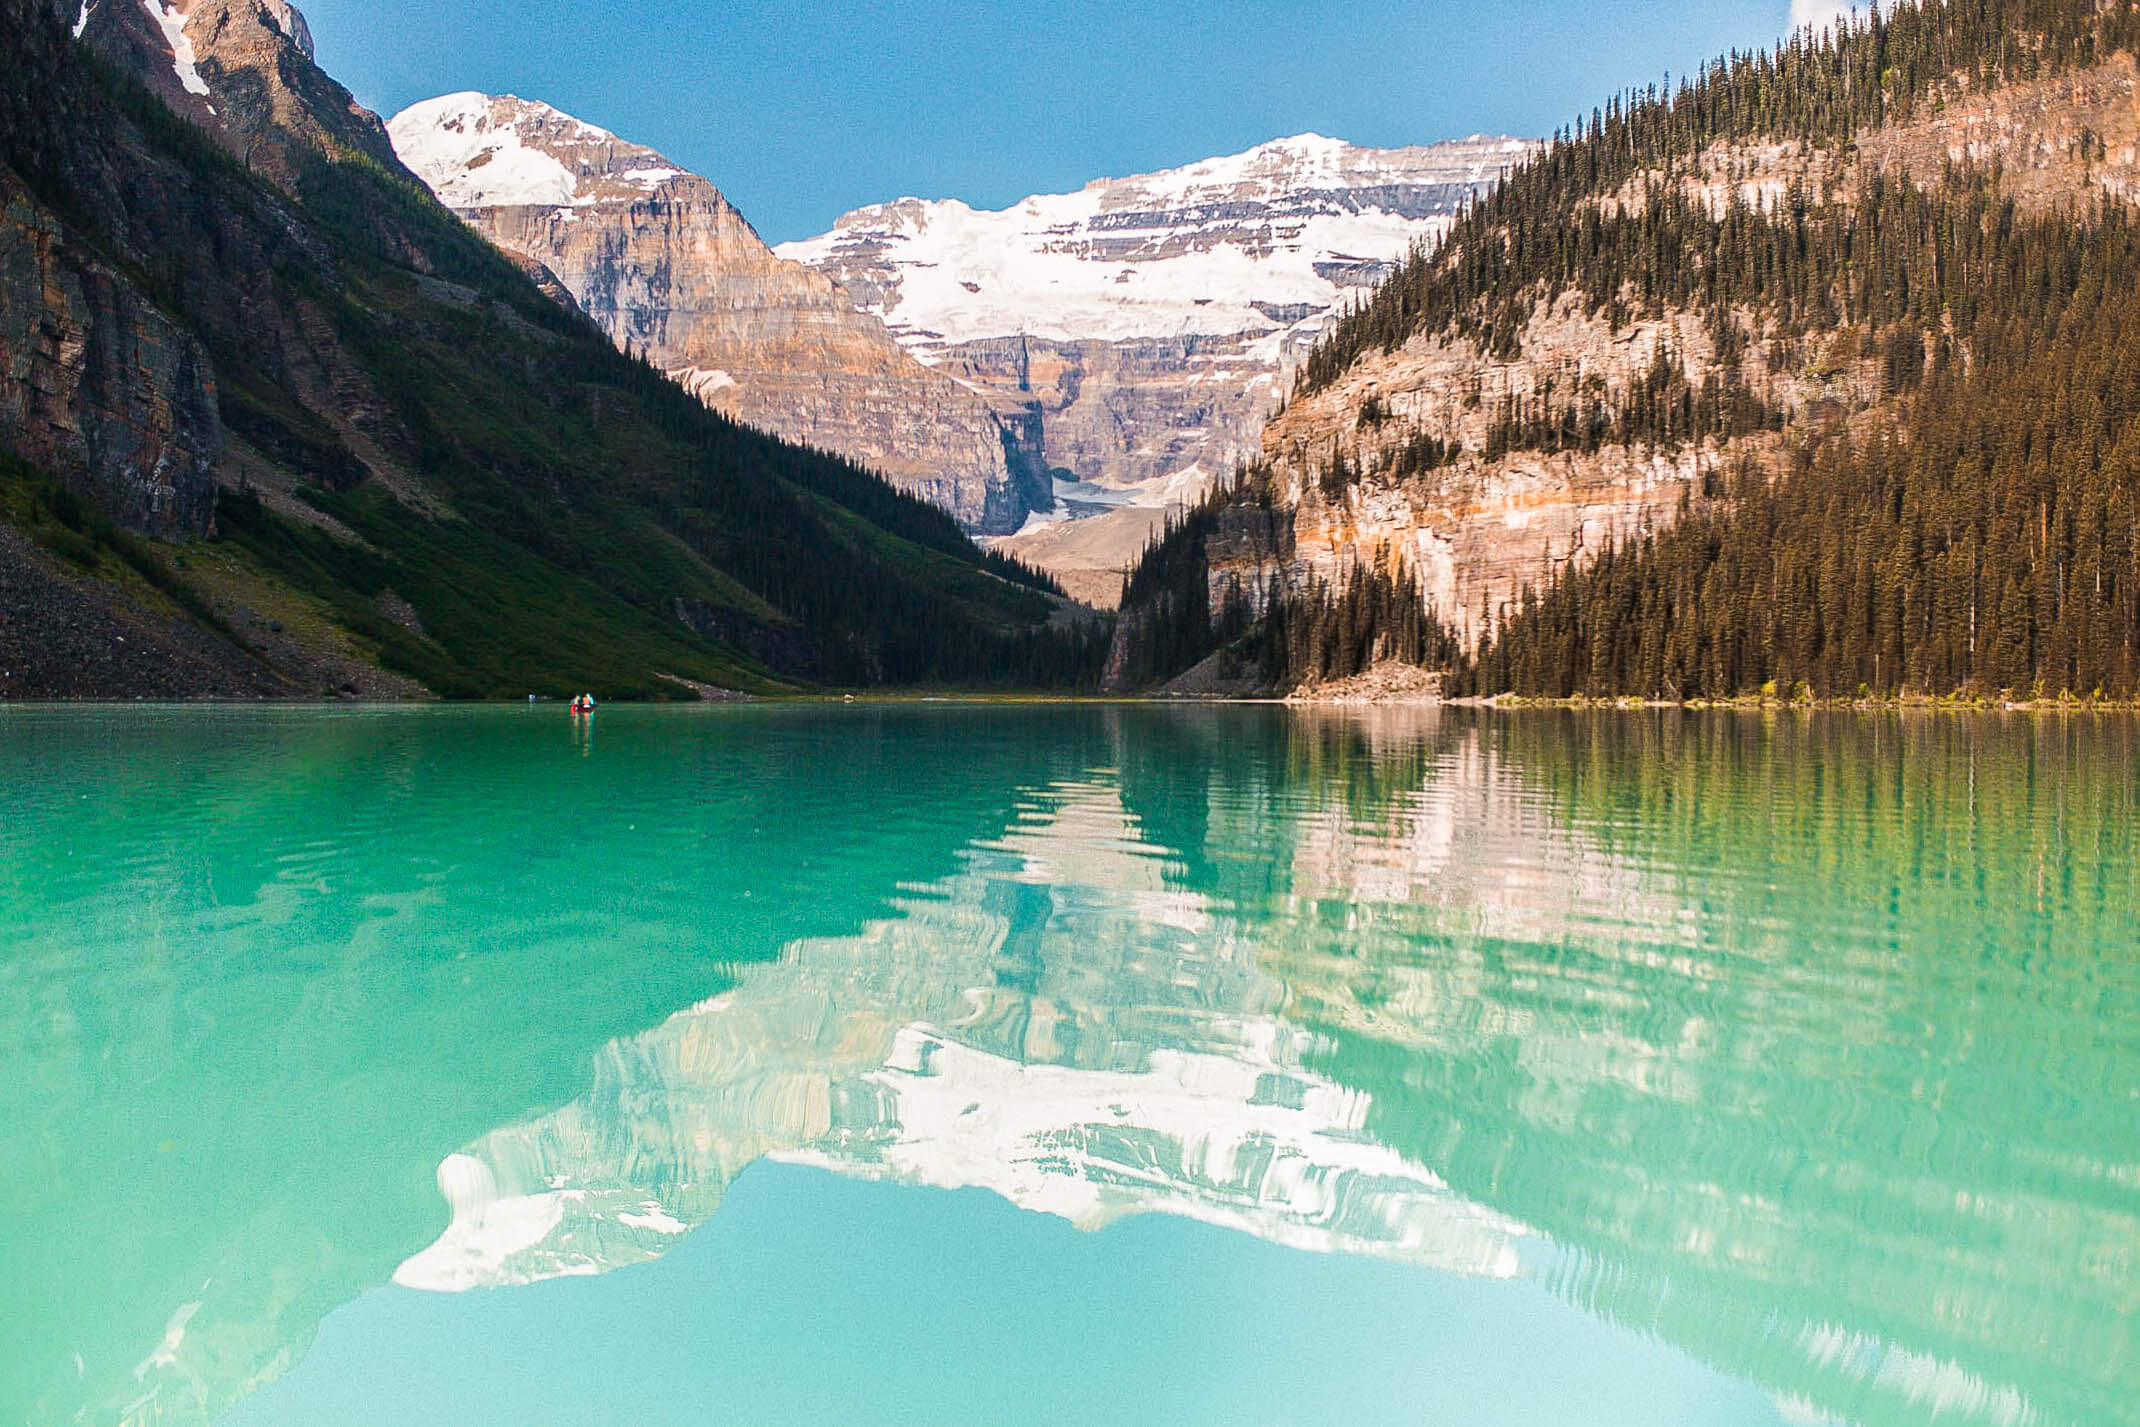 A 7-day Canadian Rockies road trip itinerary